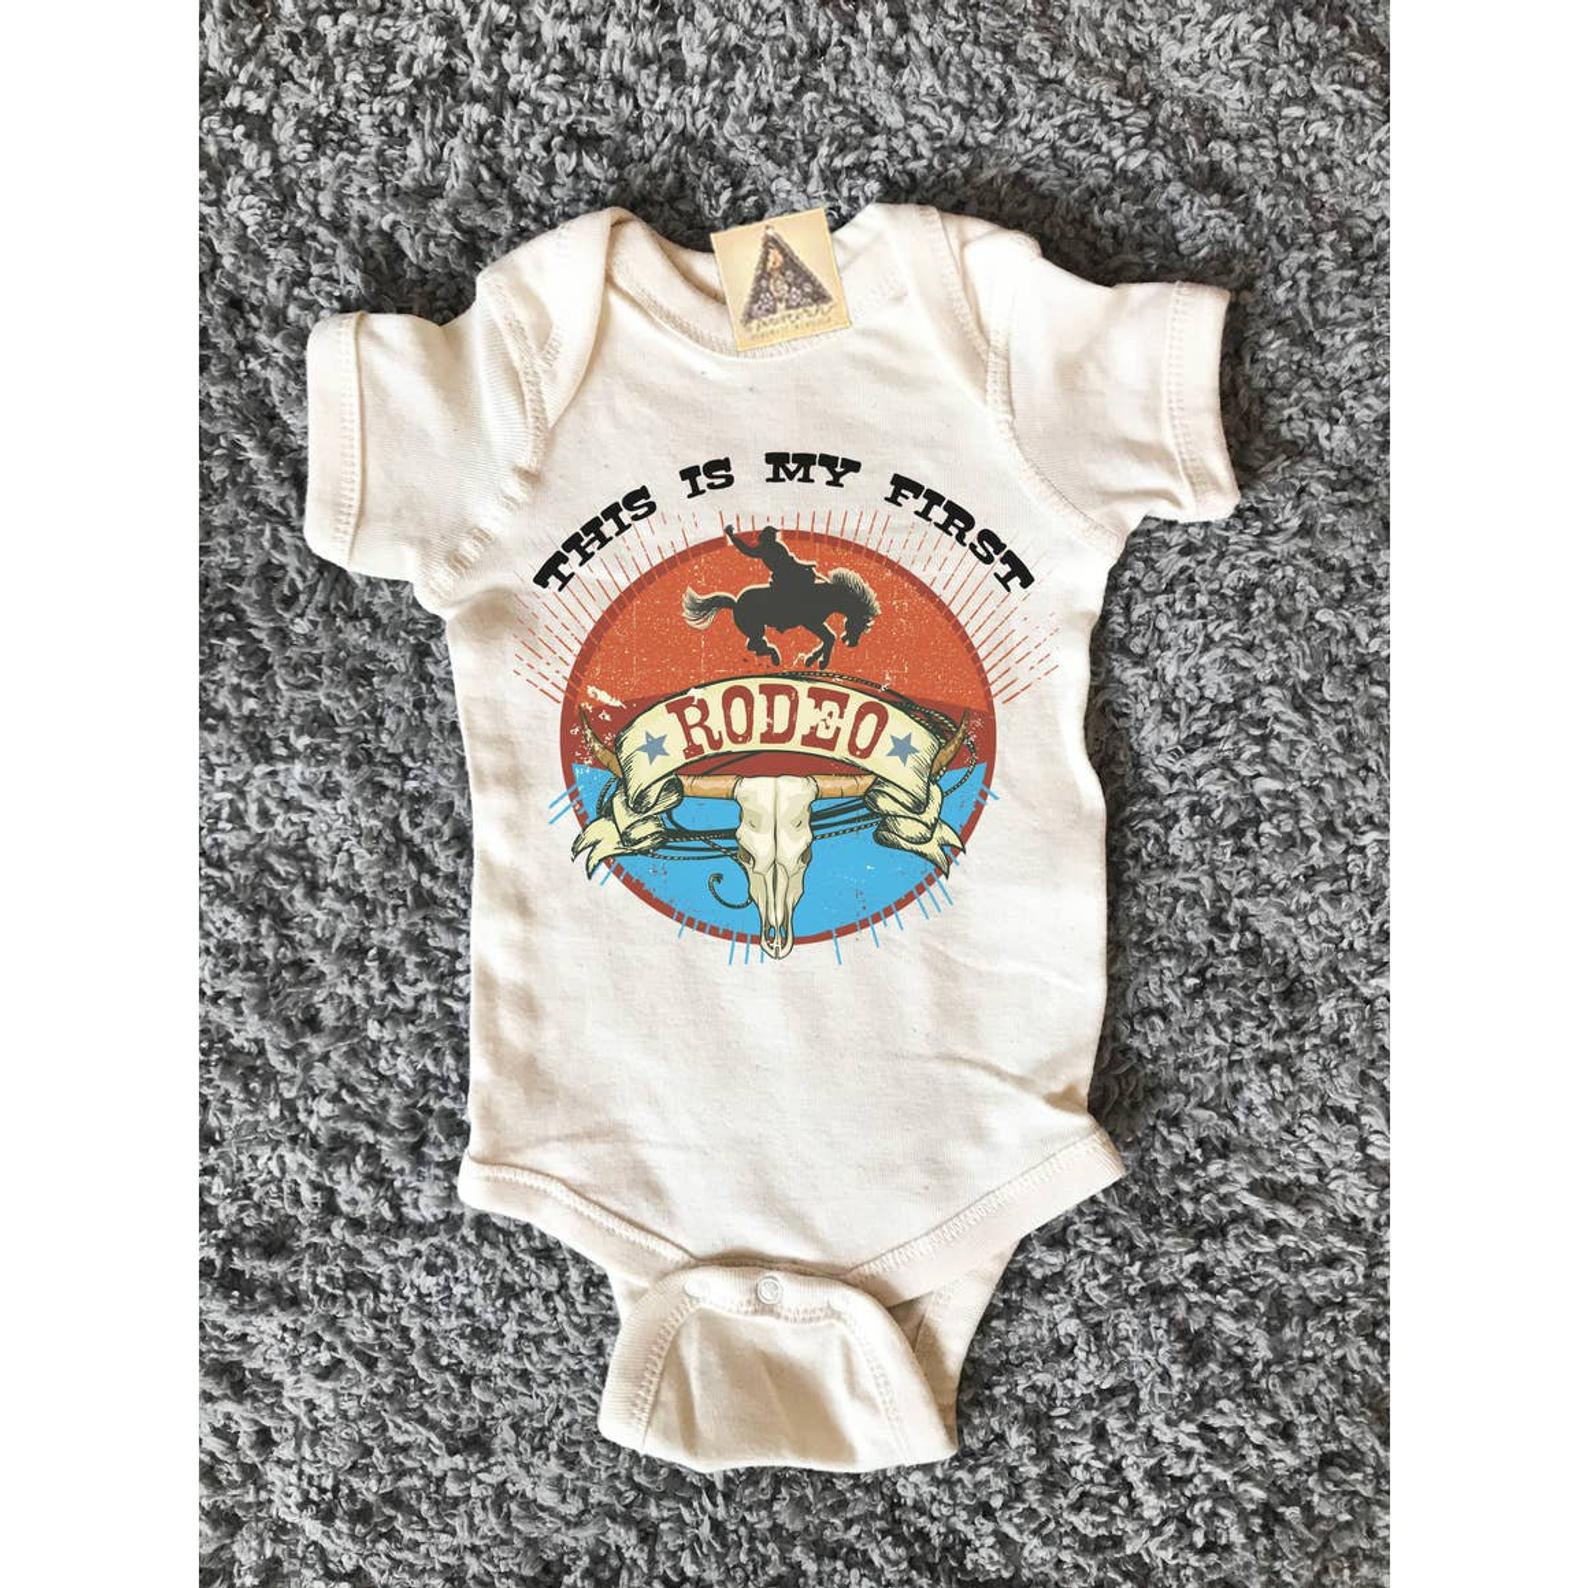 « THIS IS MY FIRST RODEO » BODYSUIT